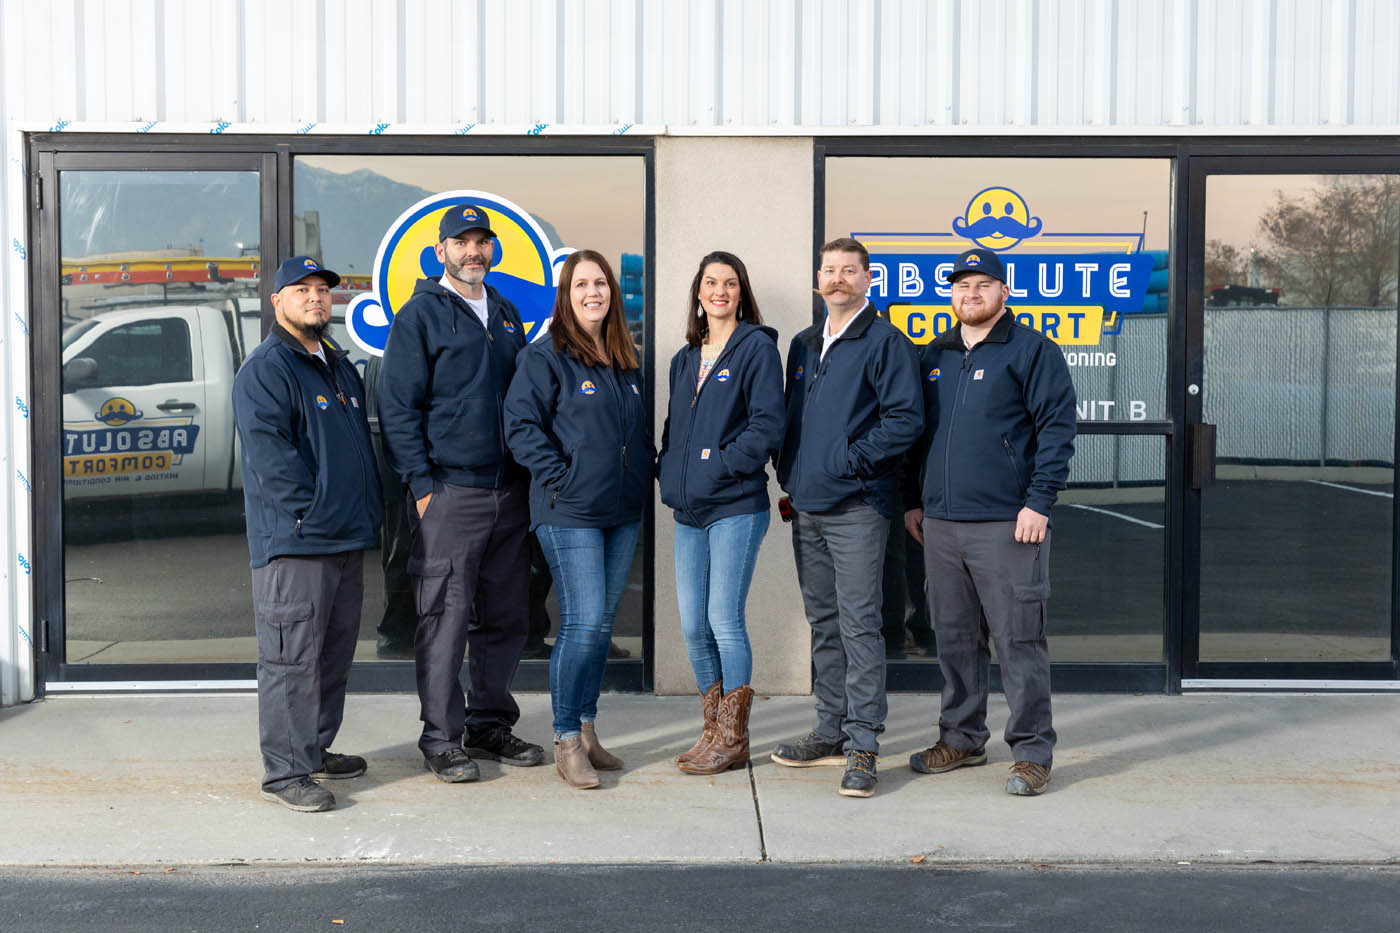 The Absolute Comfort team standing in front of our company's storefront - contact us today for a free estimate!